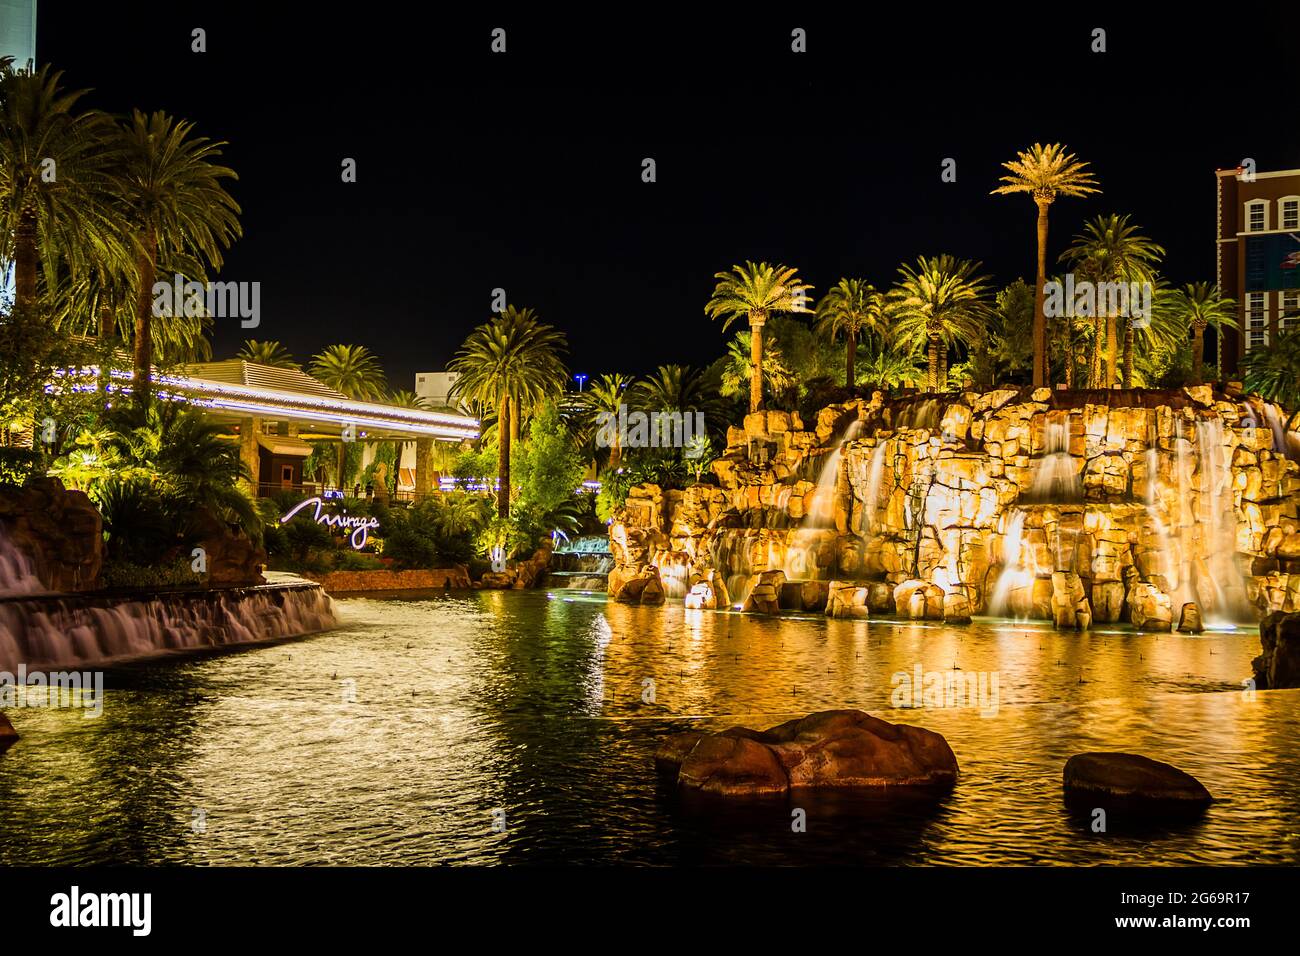 The pool with palm trees of the Mirage at night Stock Photo